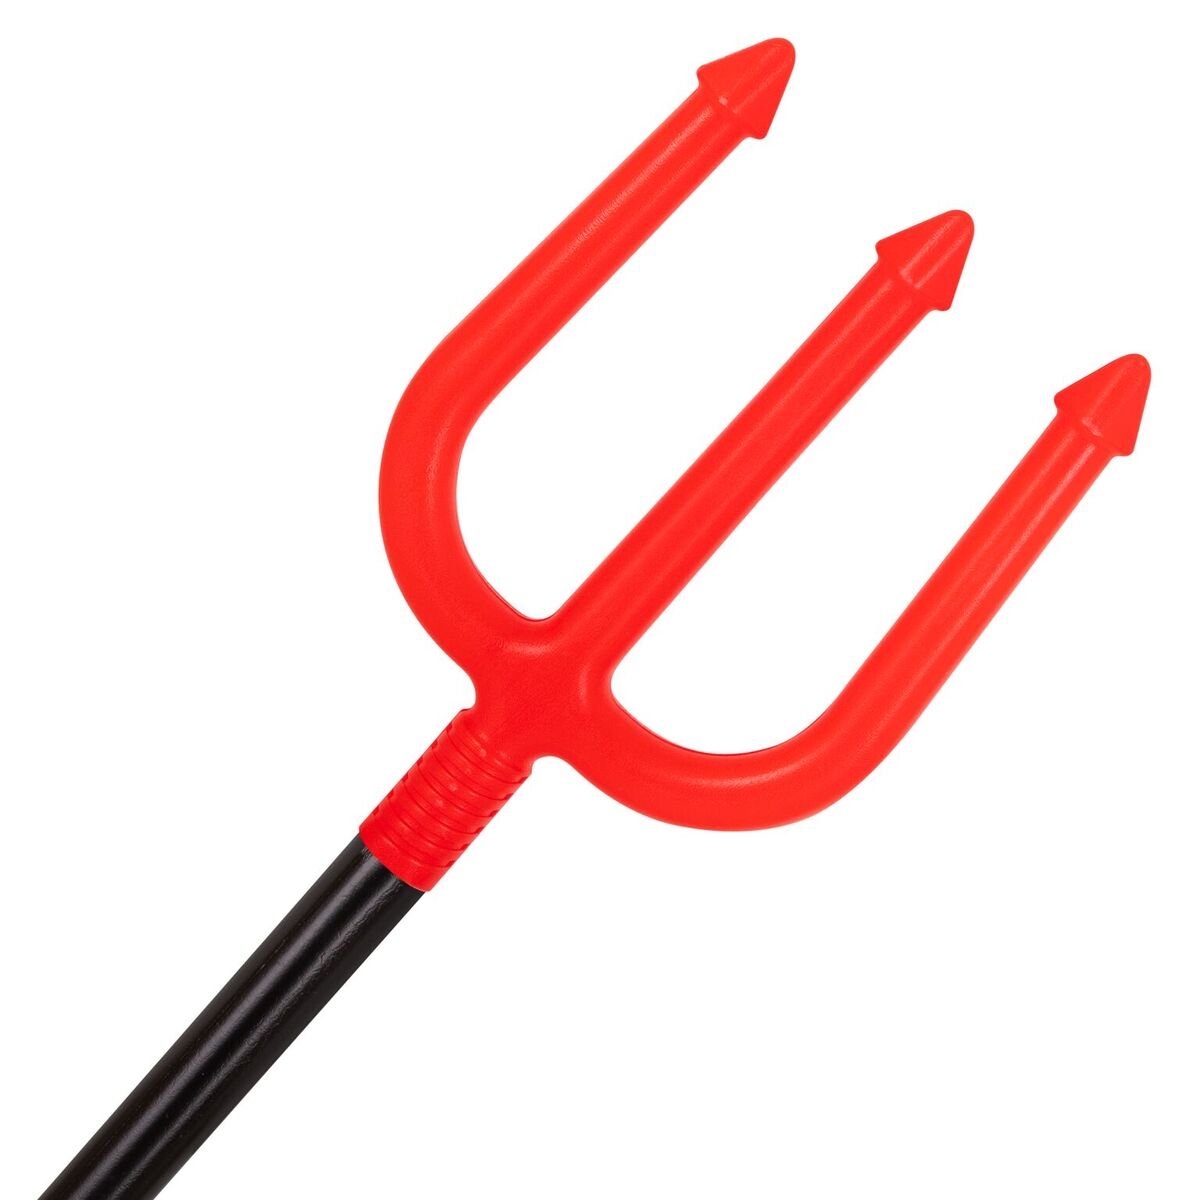 Kangaroo Costumes; Devil's Pitchfork with Handle, 44.25" Red